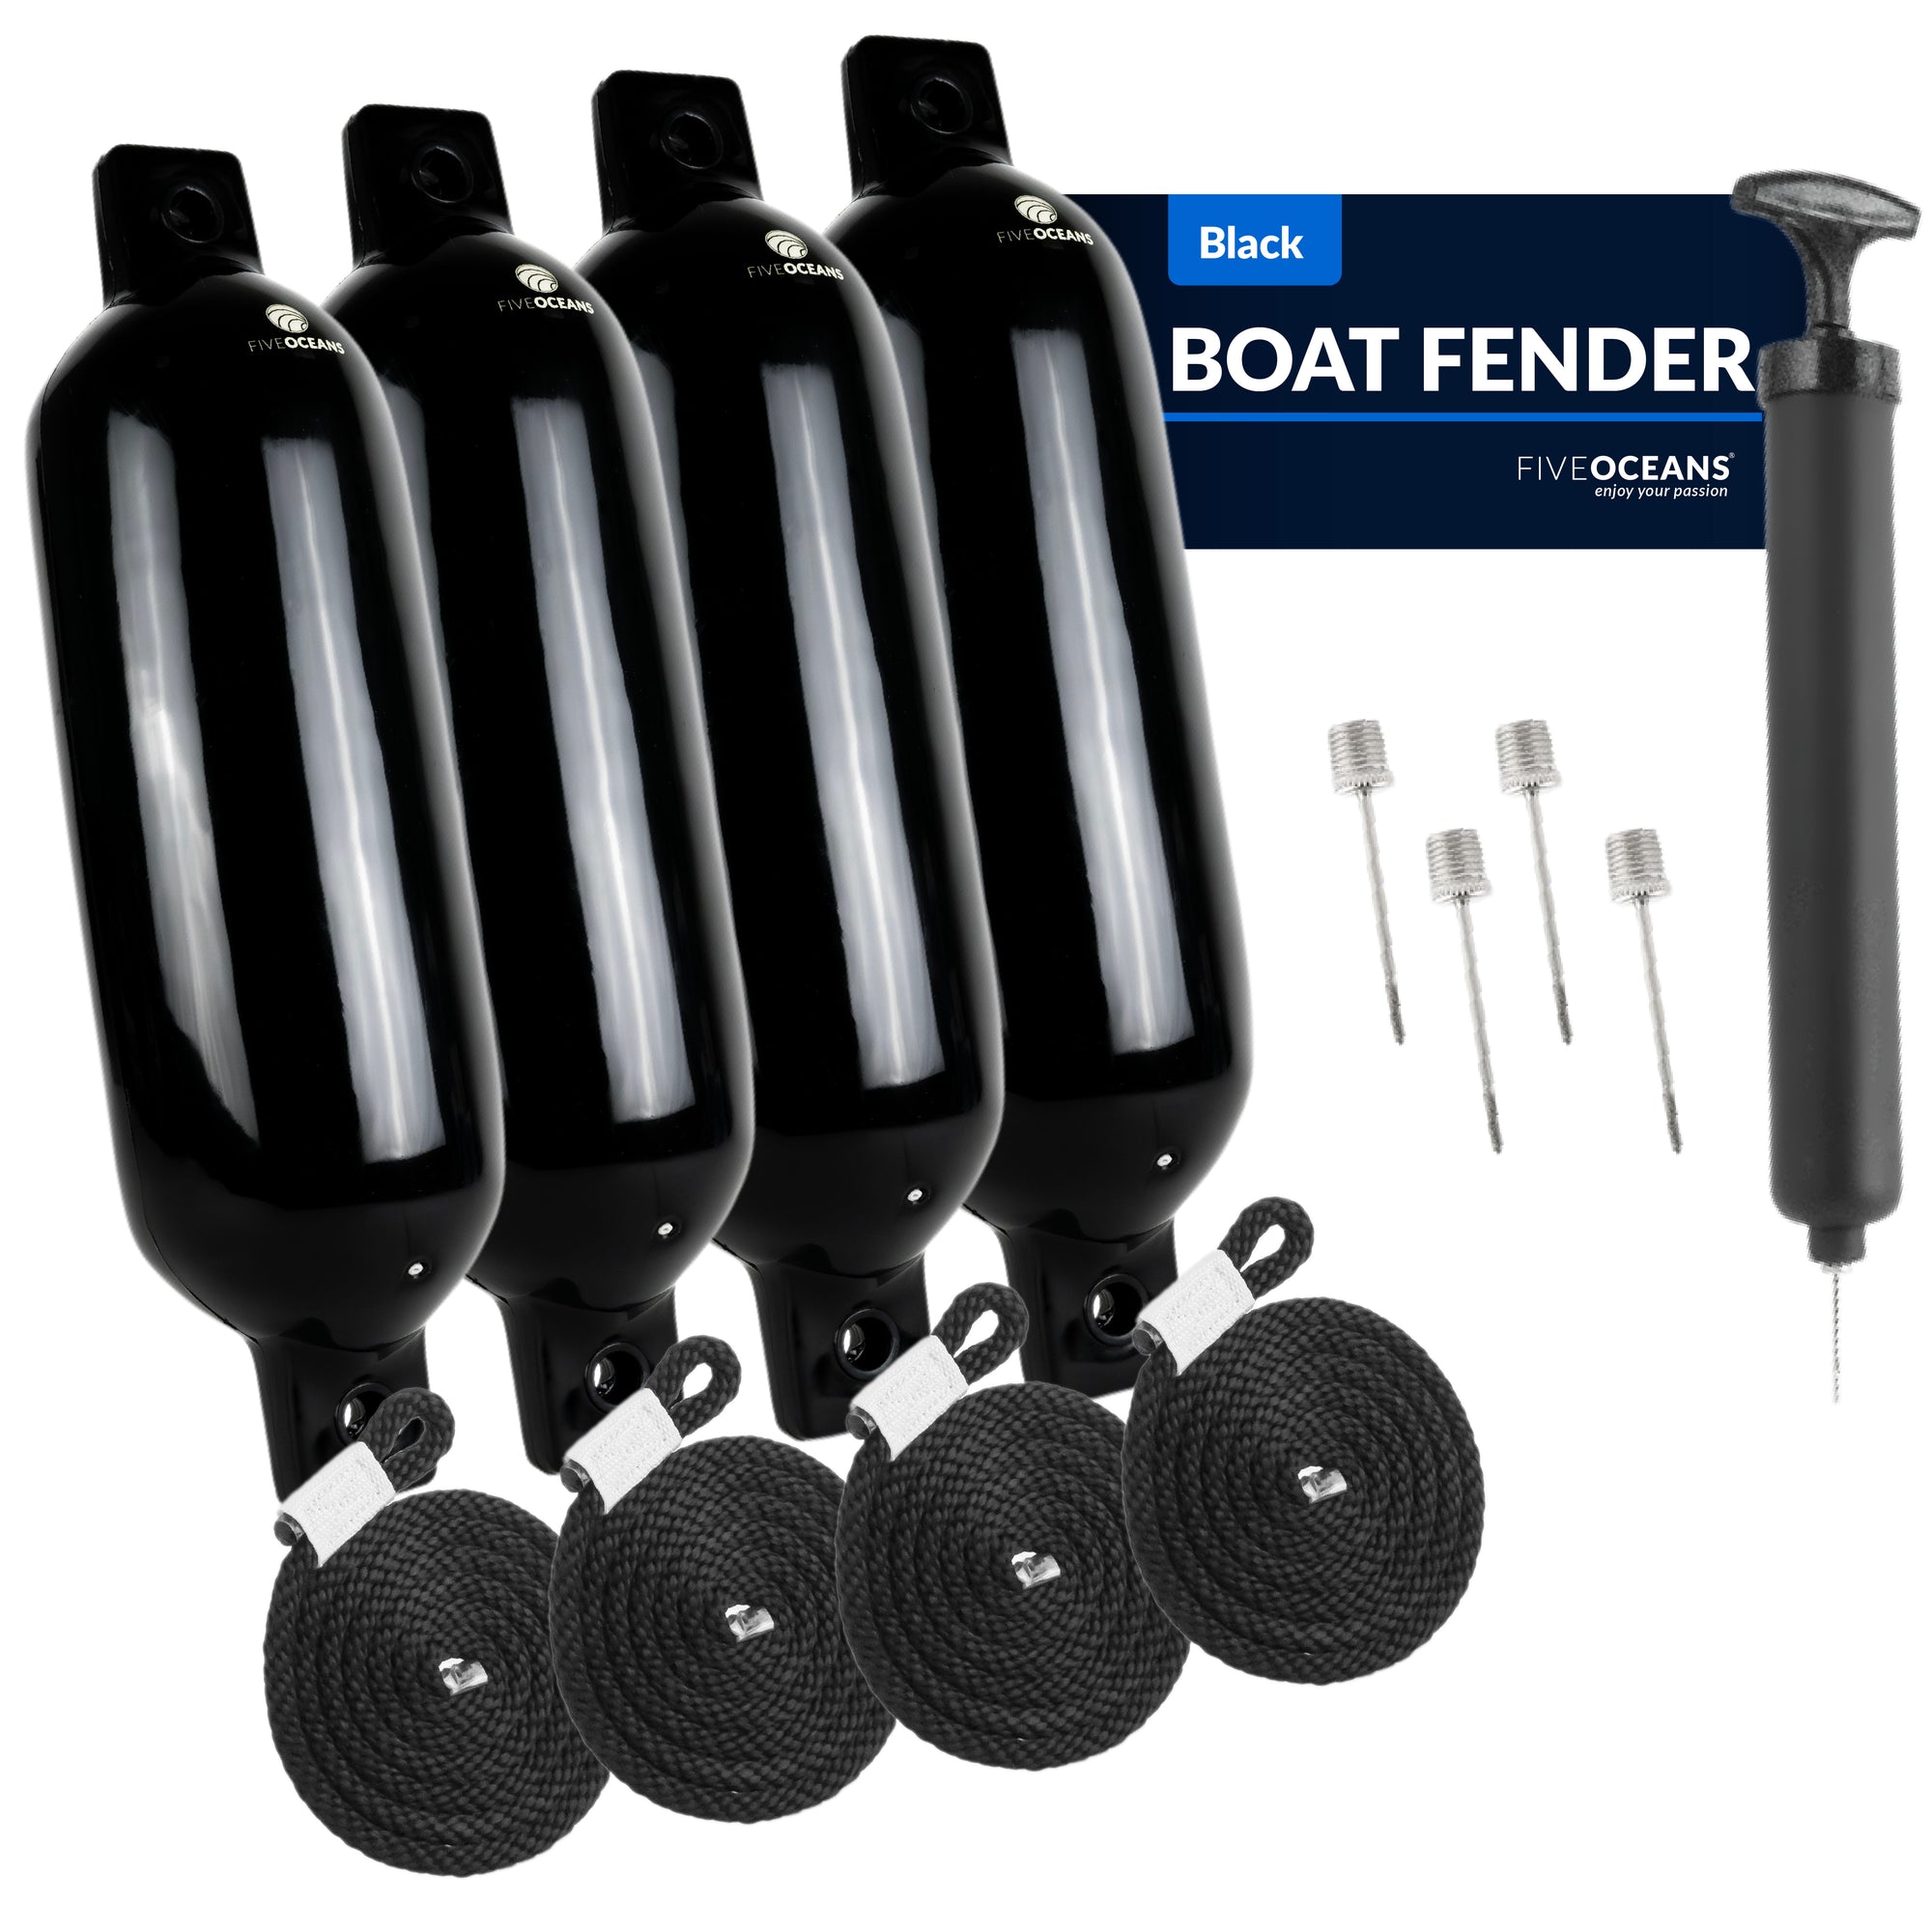 Boat Fenders, 4 Pack Marine Black Inflatable Boat Bumpers for Docking, 5.5x20" - FO4612